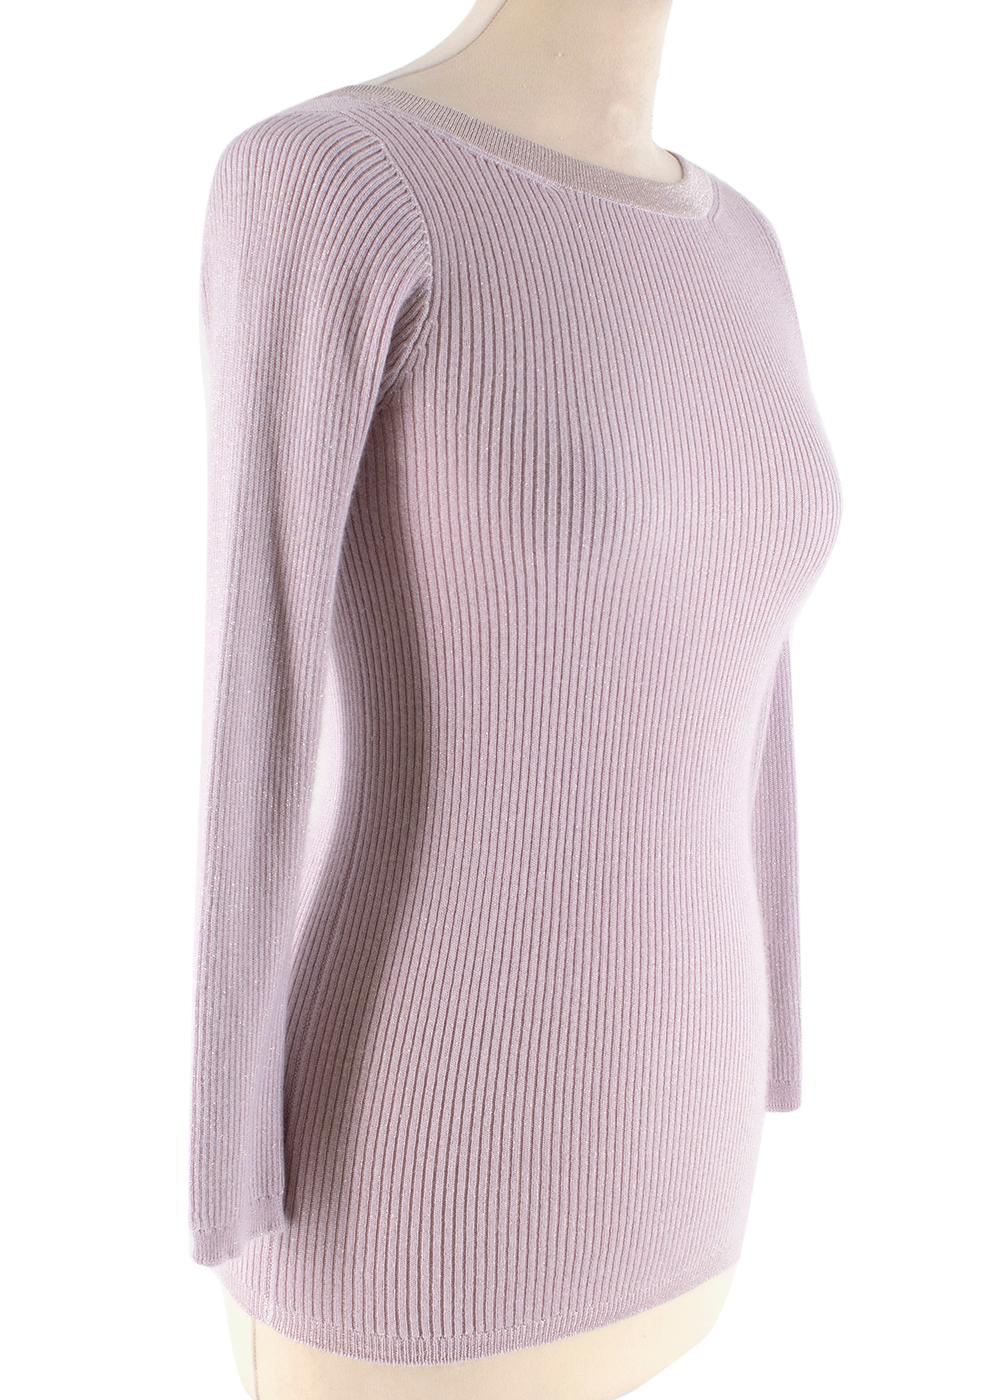 Christian Dior Cashmere & Silk Pink Lurex Knit Top

- Warm blend of cashmere & silk perfect for layering under a winter coat
- Light pink/lilac colour with blended silver sparkly weave
- Low cut back 
- Stretchy & ribbed knit
- Long sleeves
- Wide